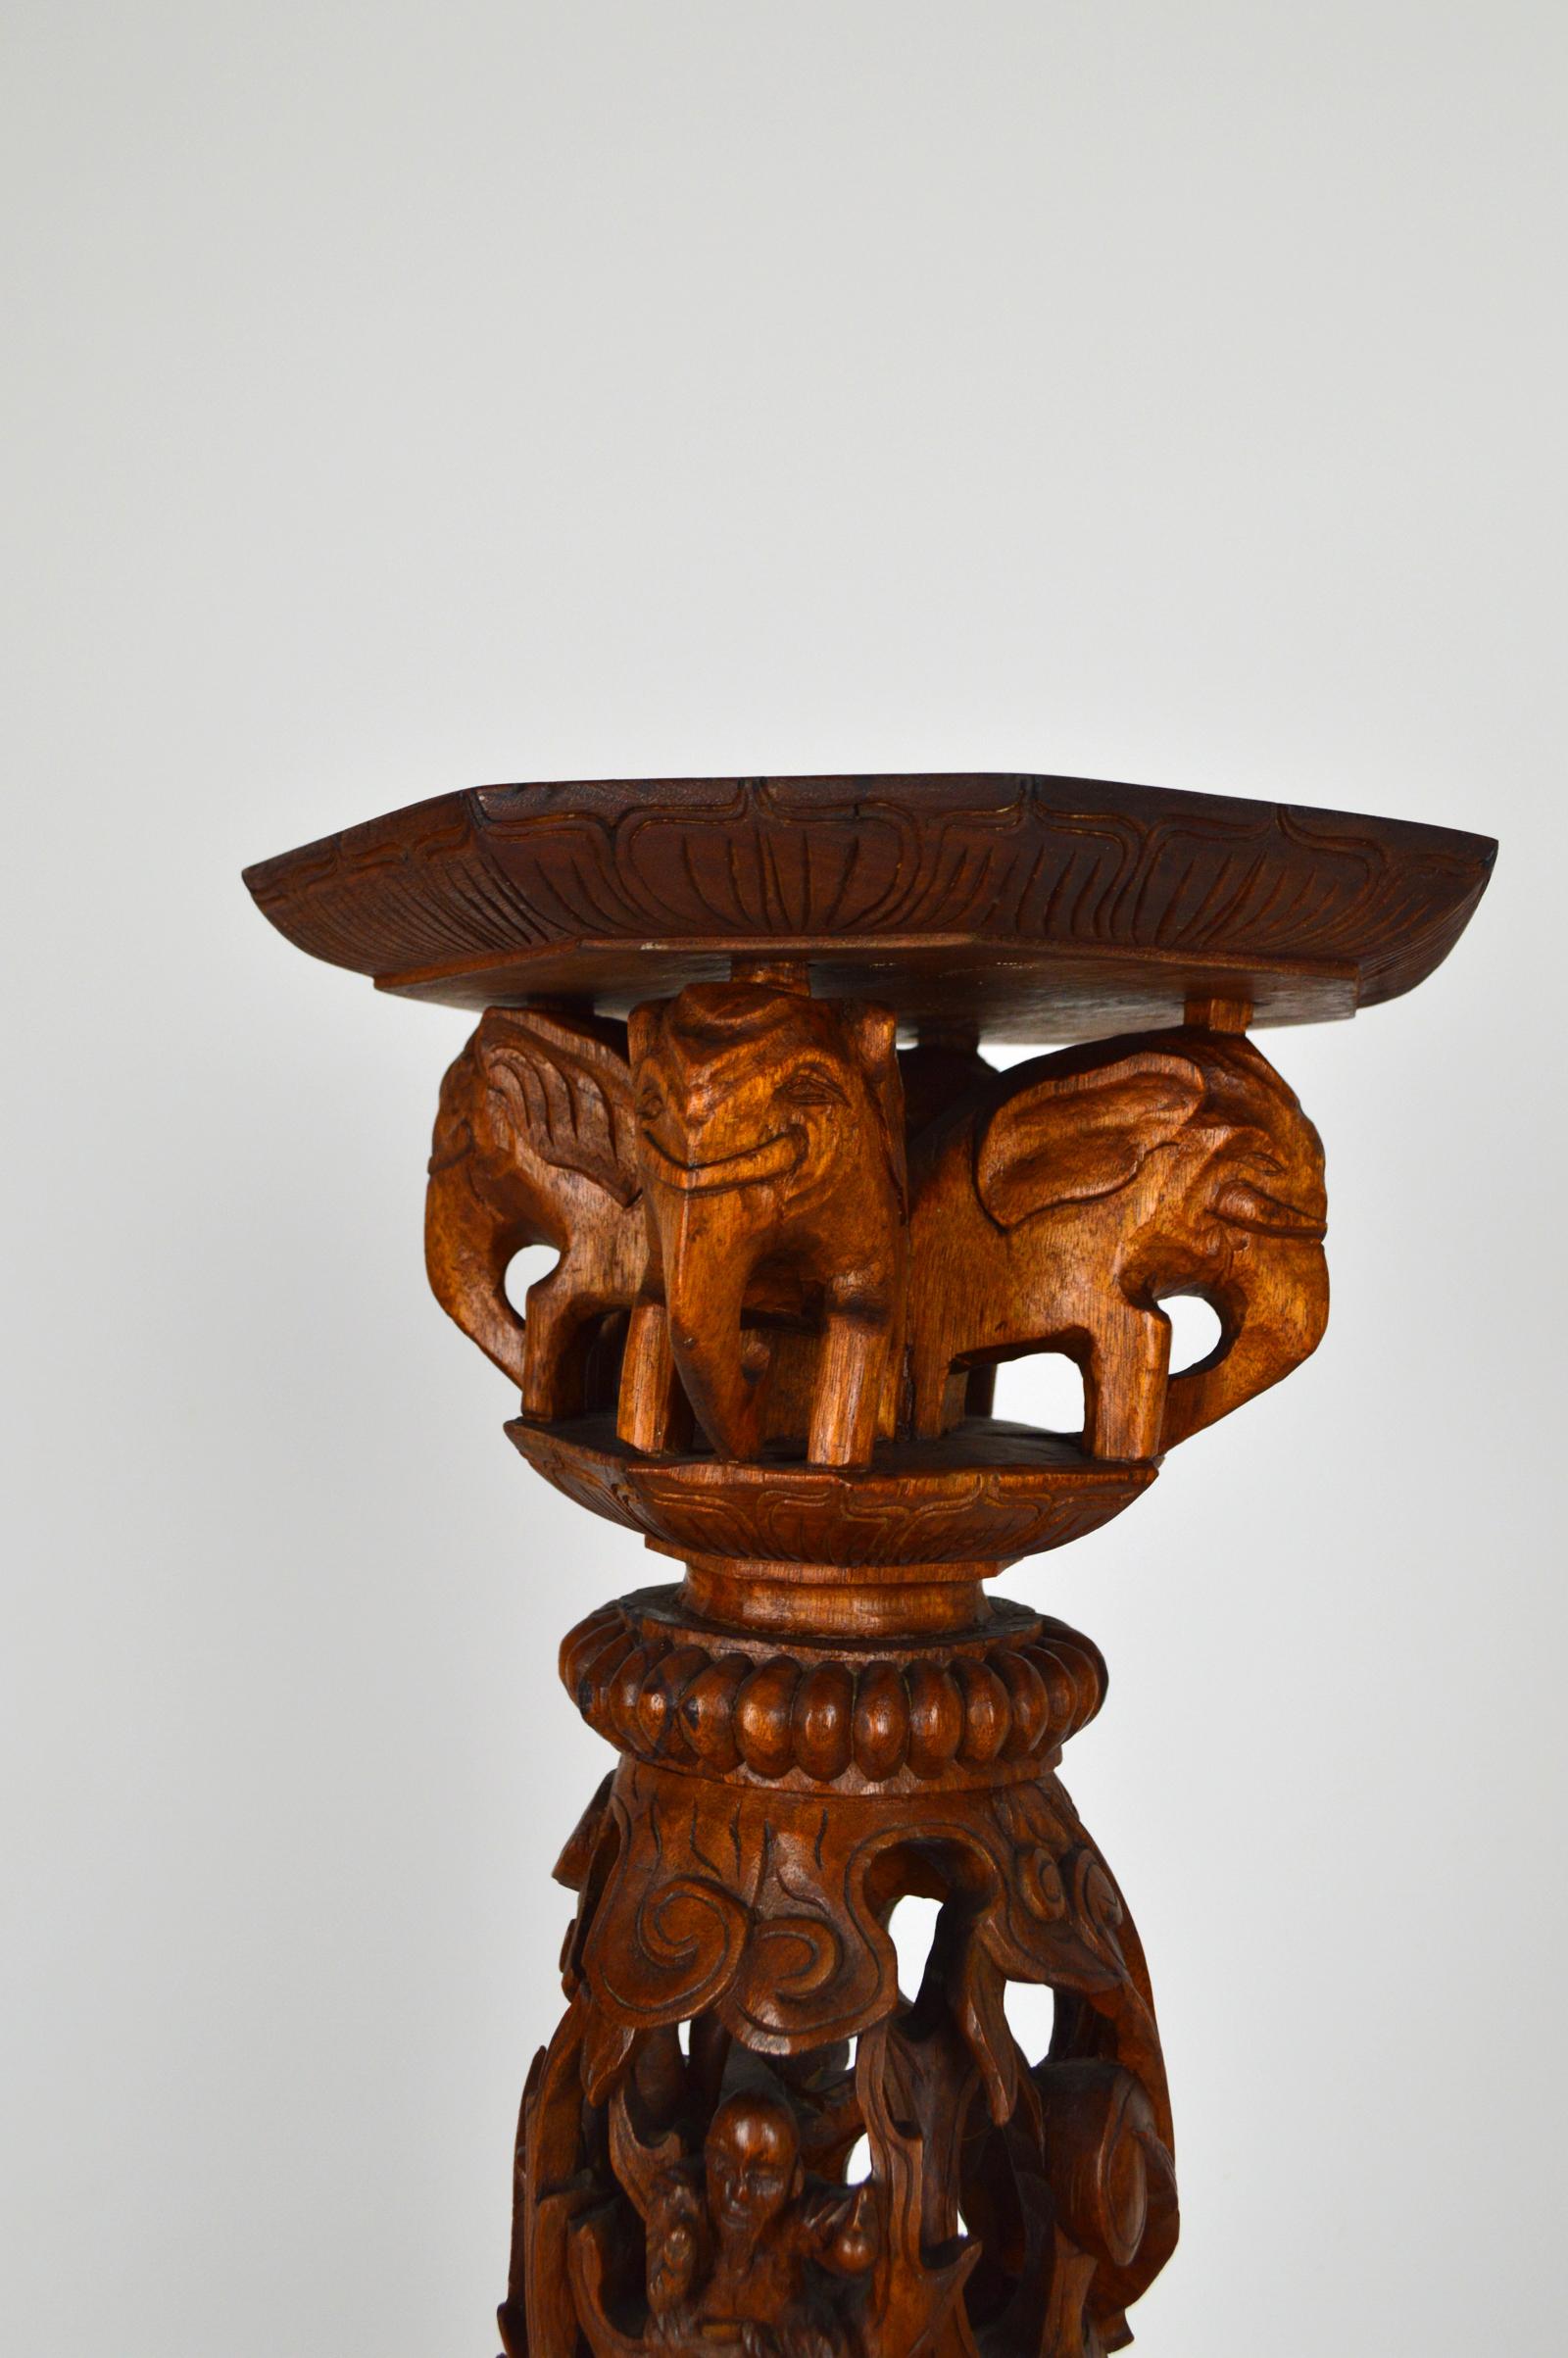 Indochinese Pedestal Table / Pot Stand in Carved Wood, Mythological Theme, 1890s For Sale 13